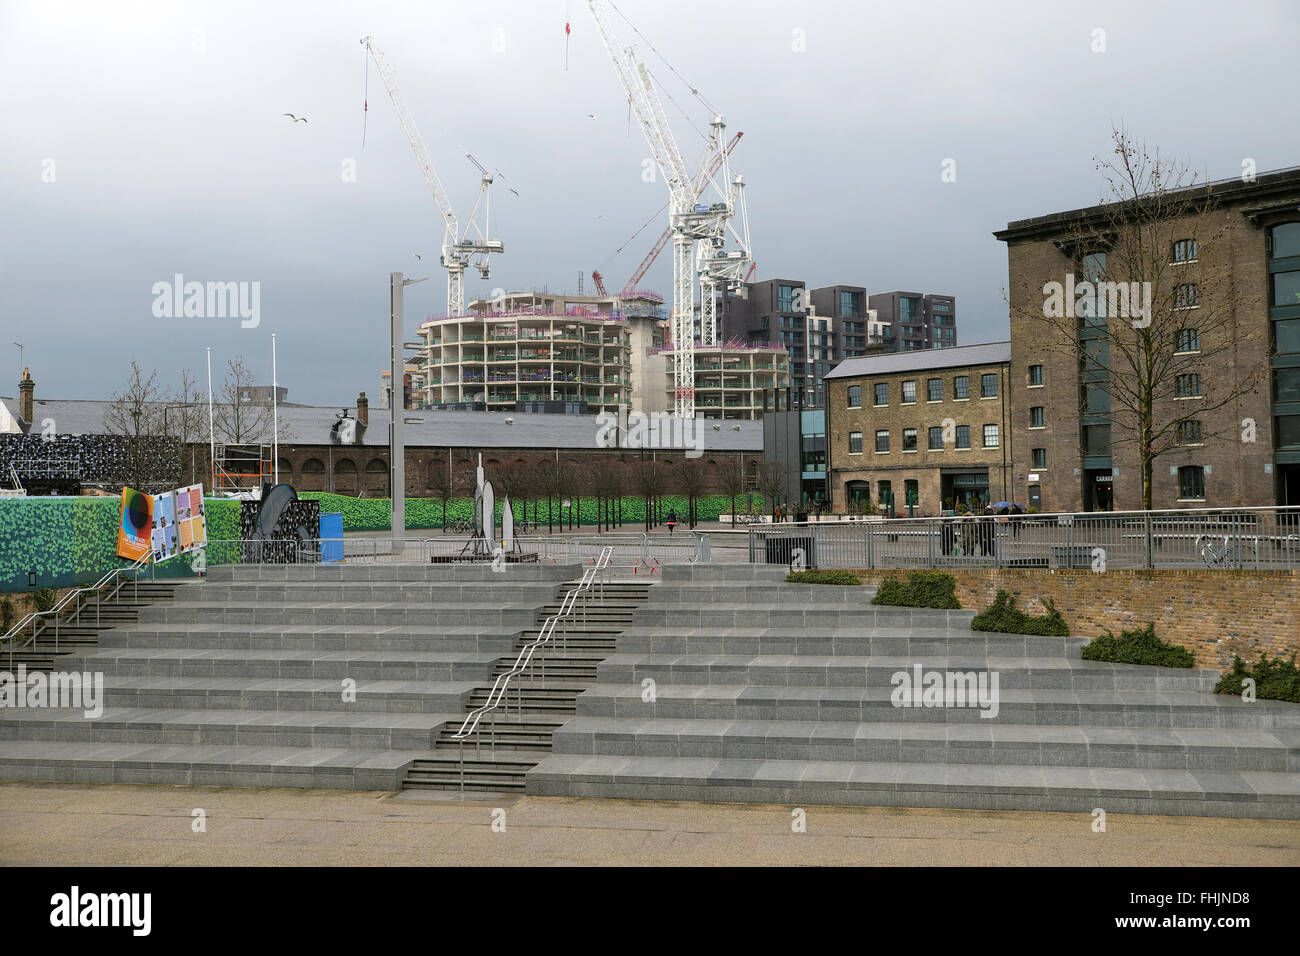 Cranes over Kings Cross gasholders apartment construction site, steps and view of UAL University of the Arts Granary Square, London UK    KATHY DEWITT Stock Photo